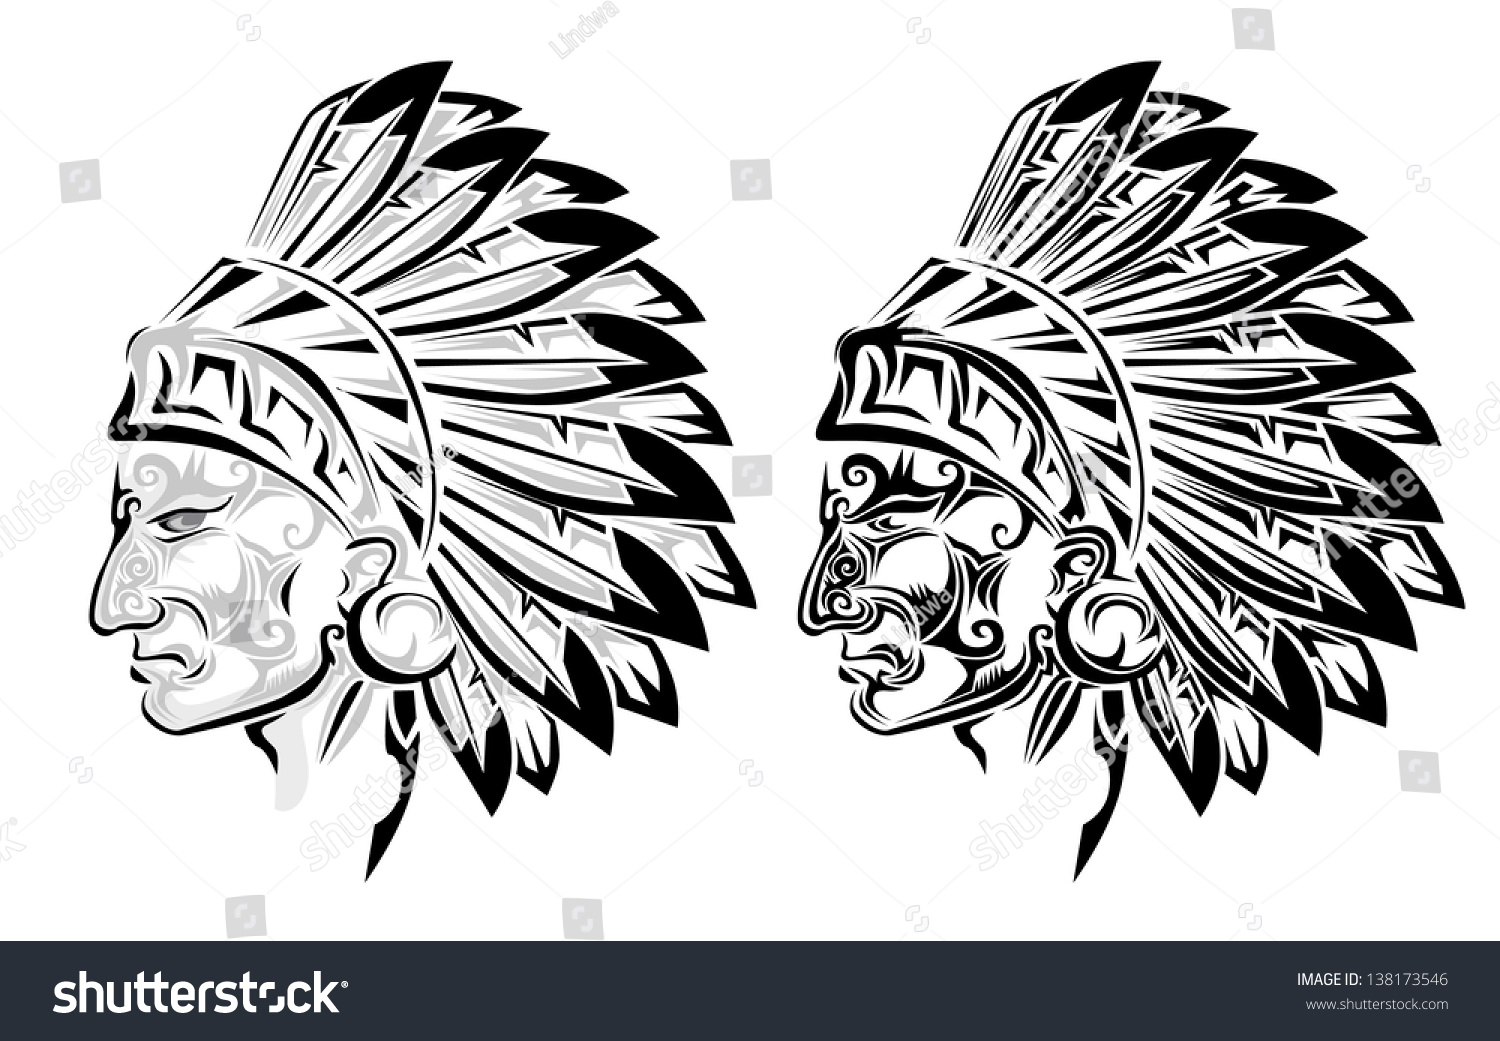 American Indian Chief Tattoo Stock Vector 138173546 : Shutterstock